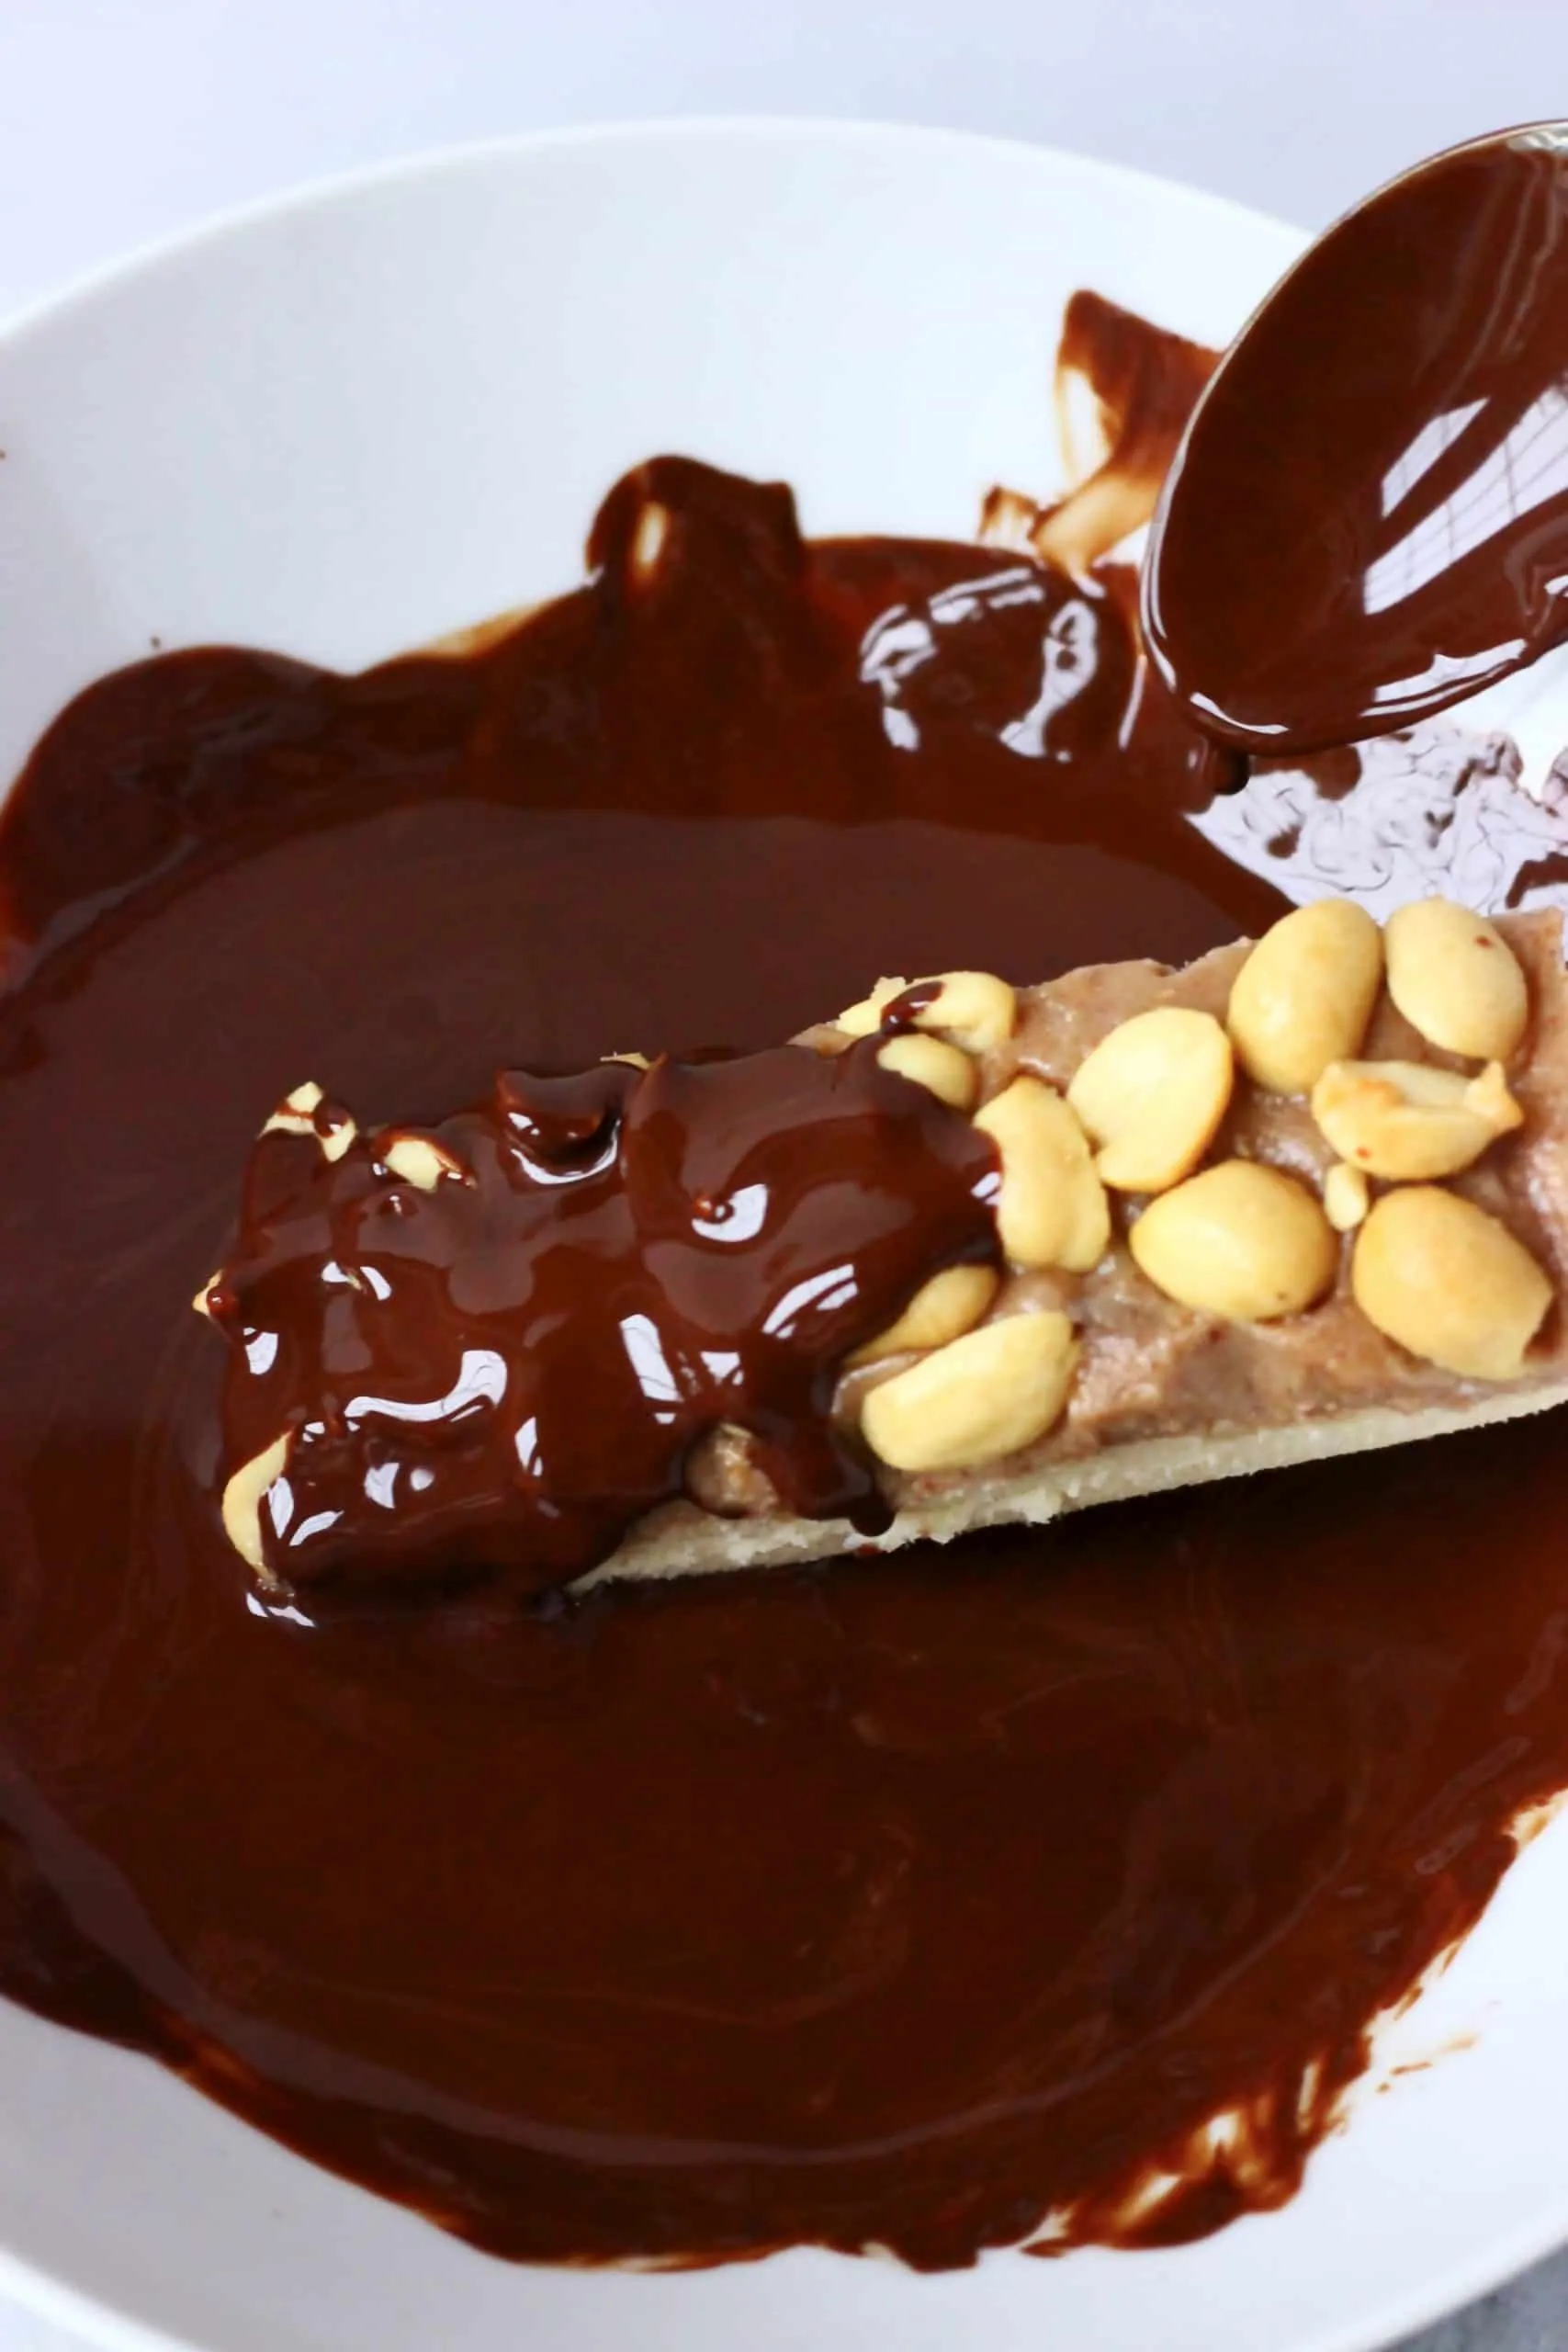 A vegan snickers bar being dipped into a bowl of melted chocolate